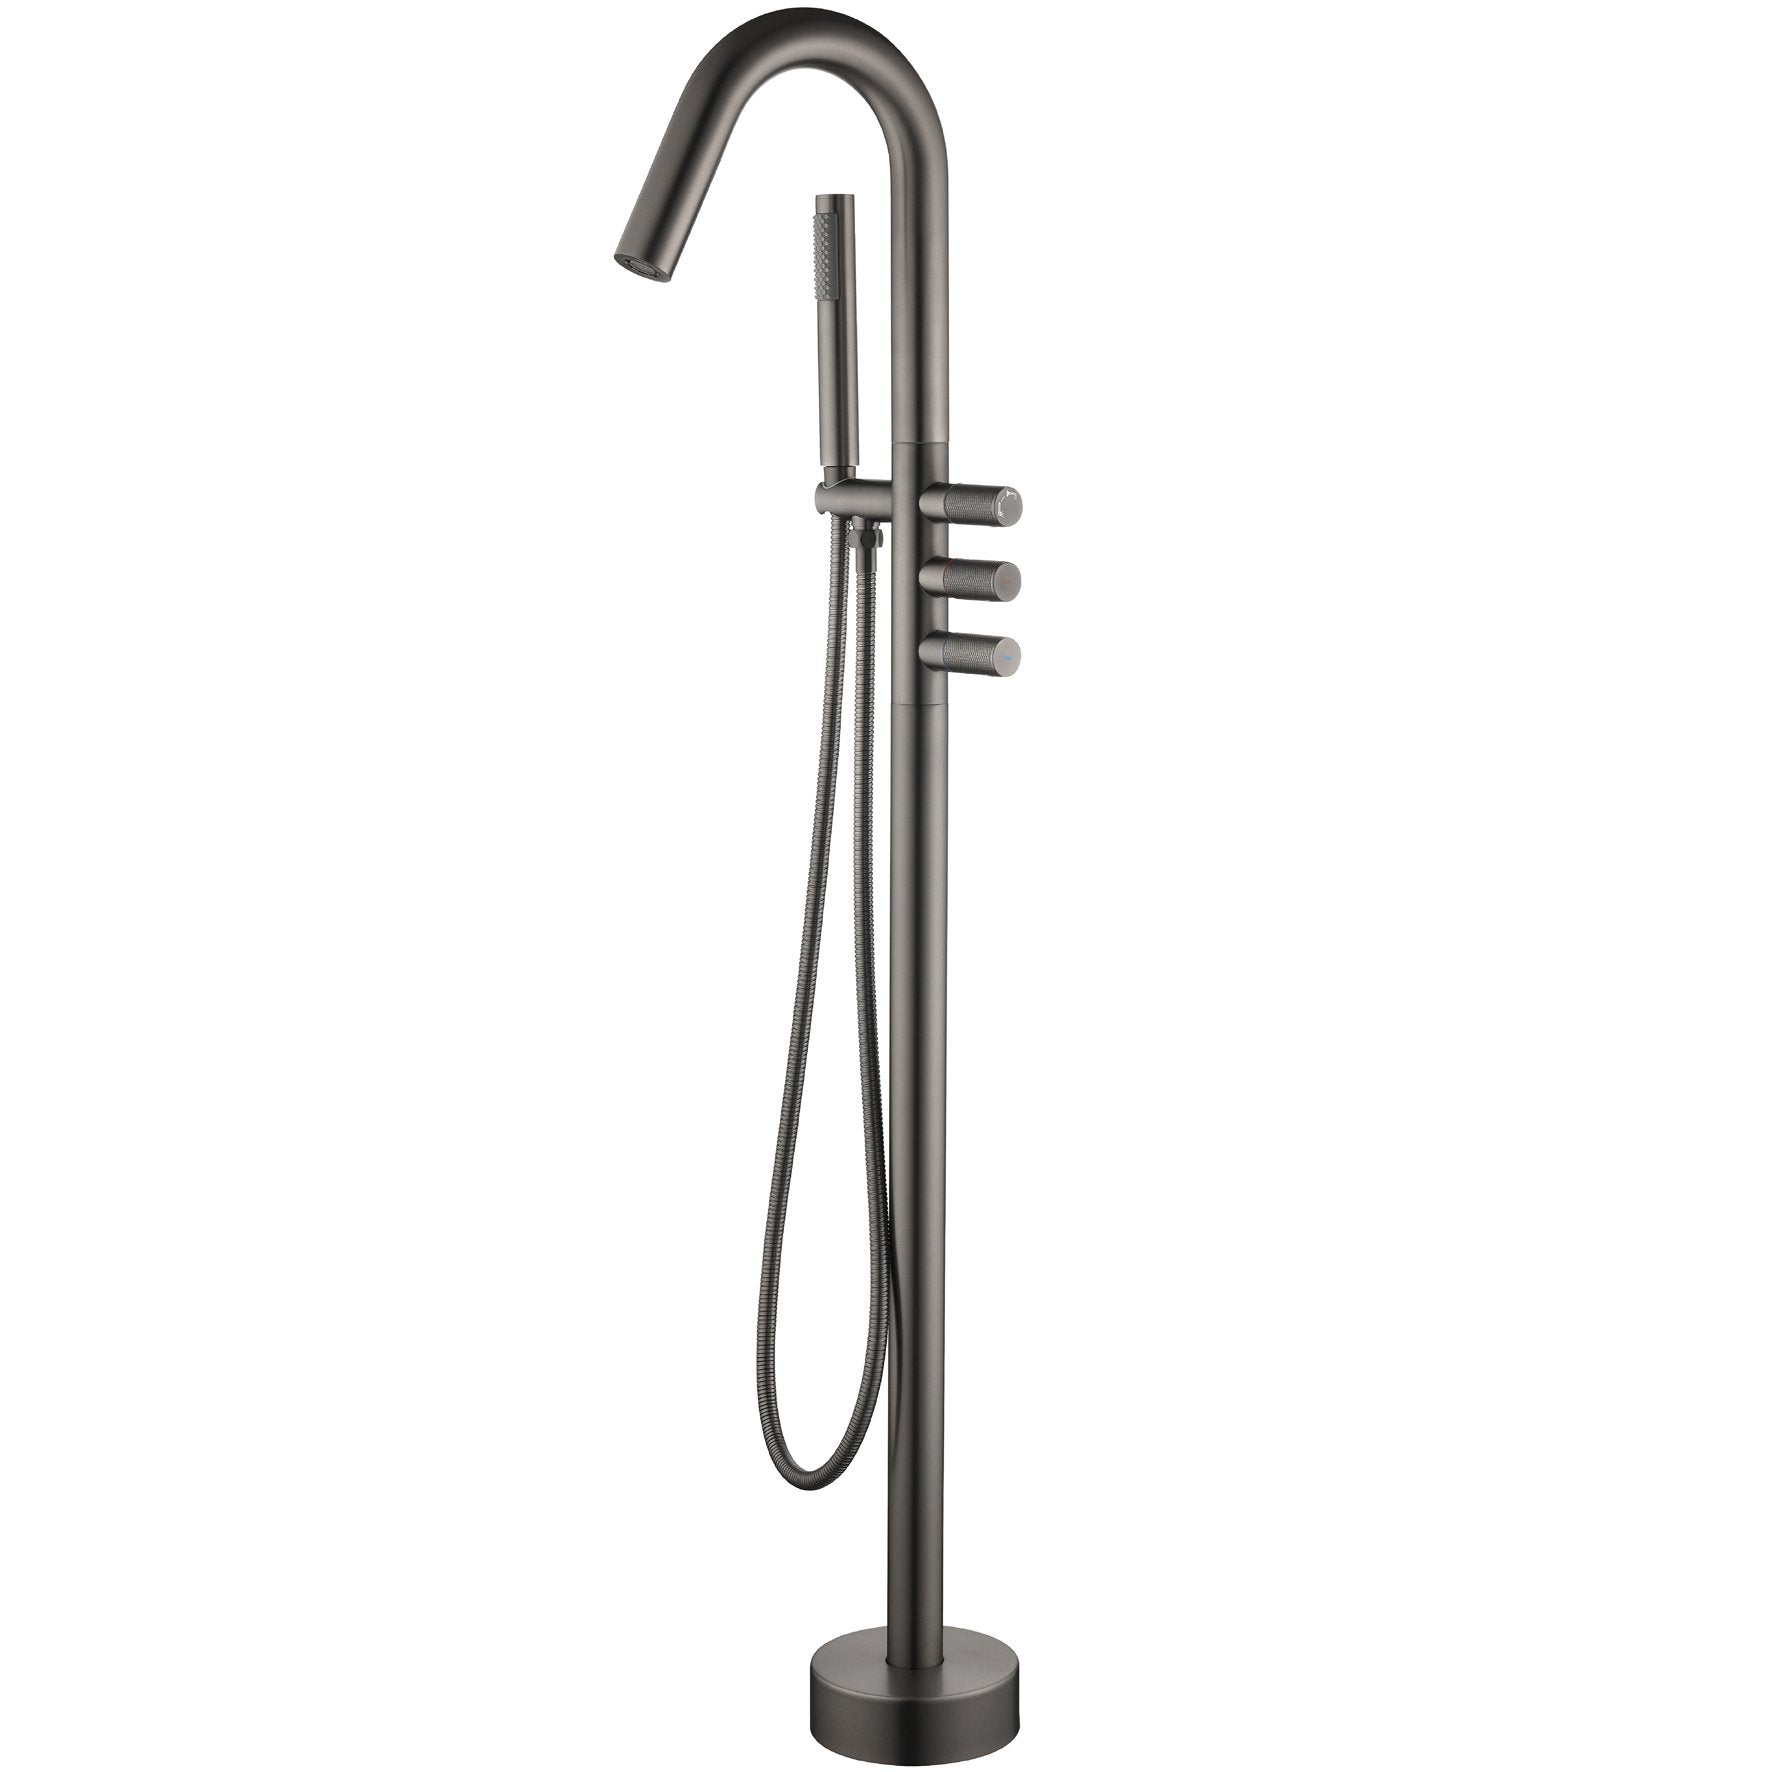 Freestanding Floor Mount 3-Handle Bath Tub Filler Faucet with Handheld Shower and Water Supply Lines in Gunmetal Gray